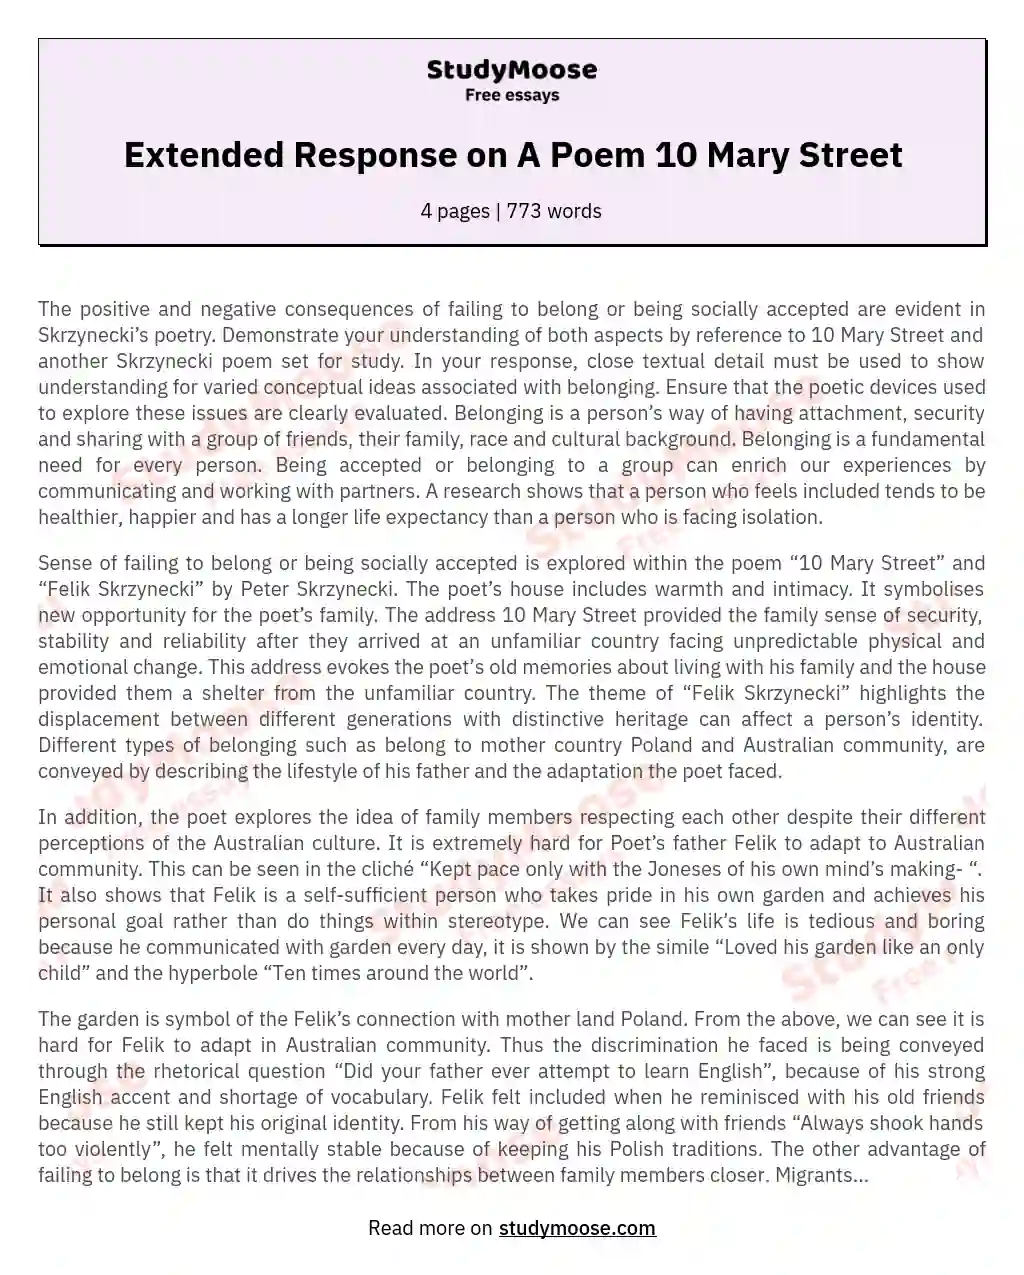 Extended Response on A Poem 10 Mary Street